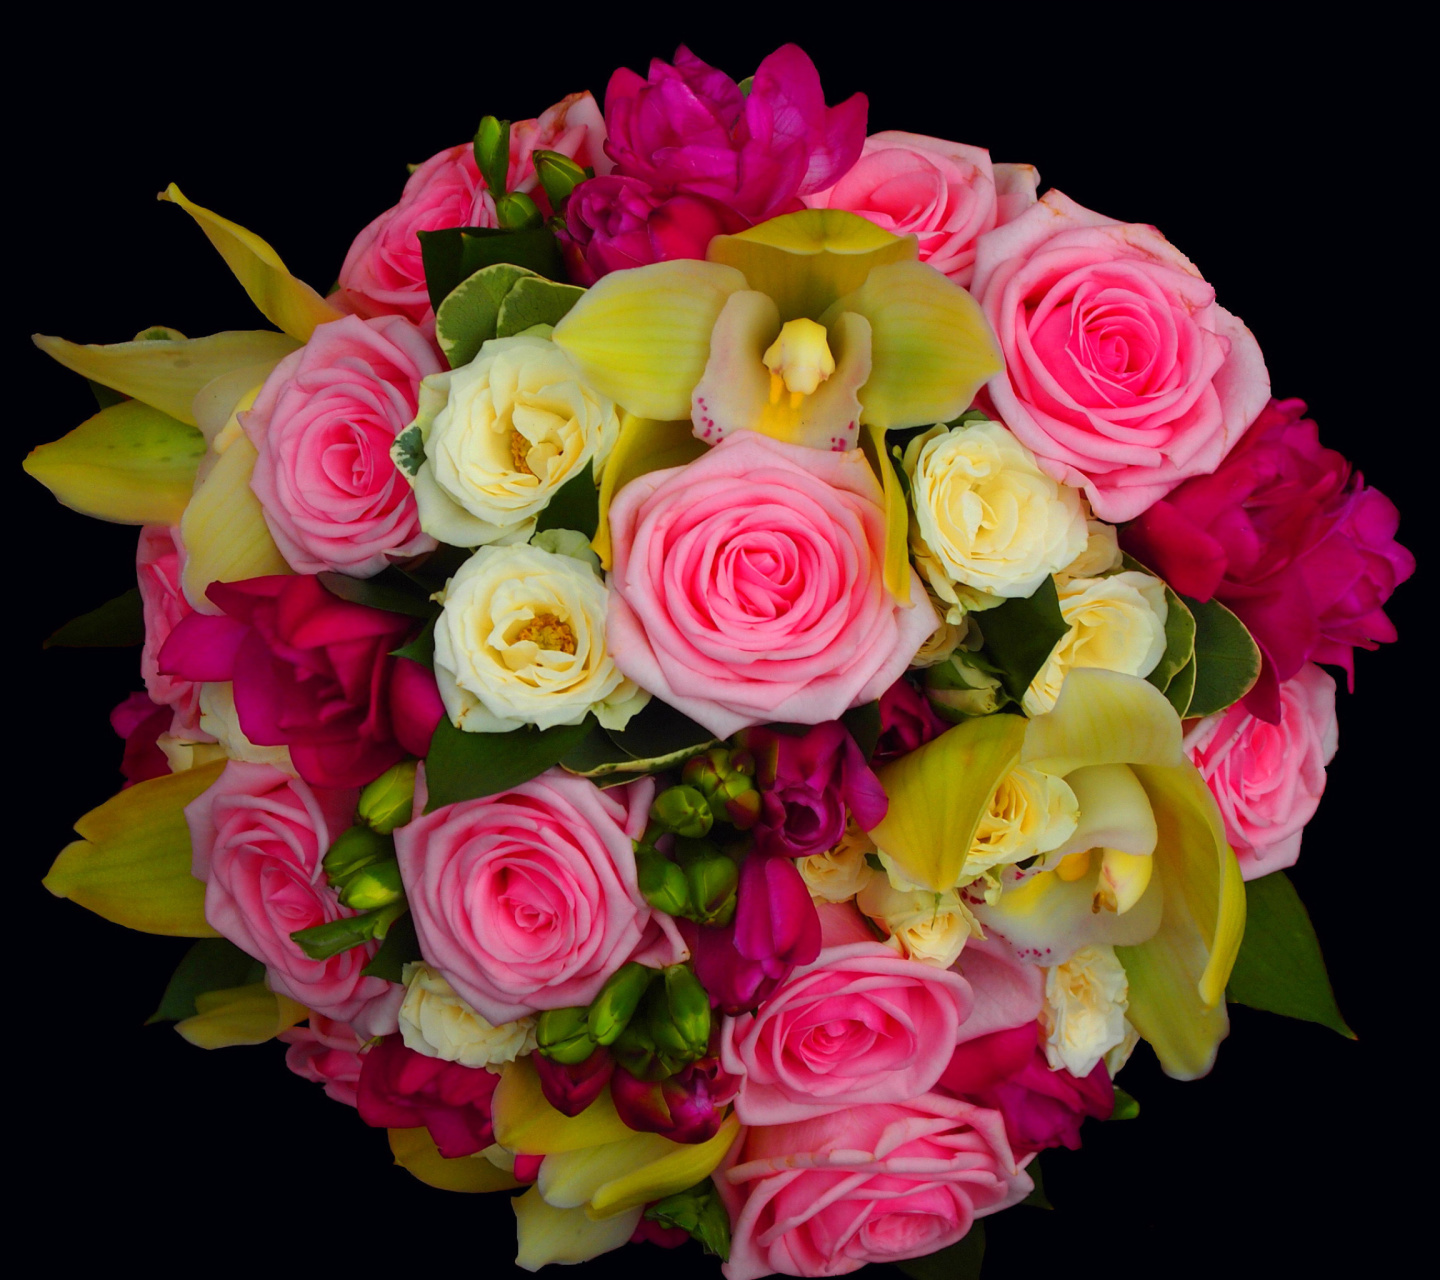 Bouquet of roses and yellow orchid, floristry screenshot #1 1440x1280